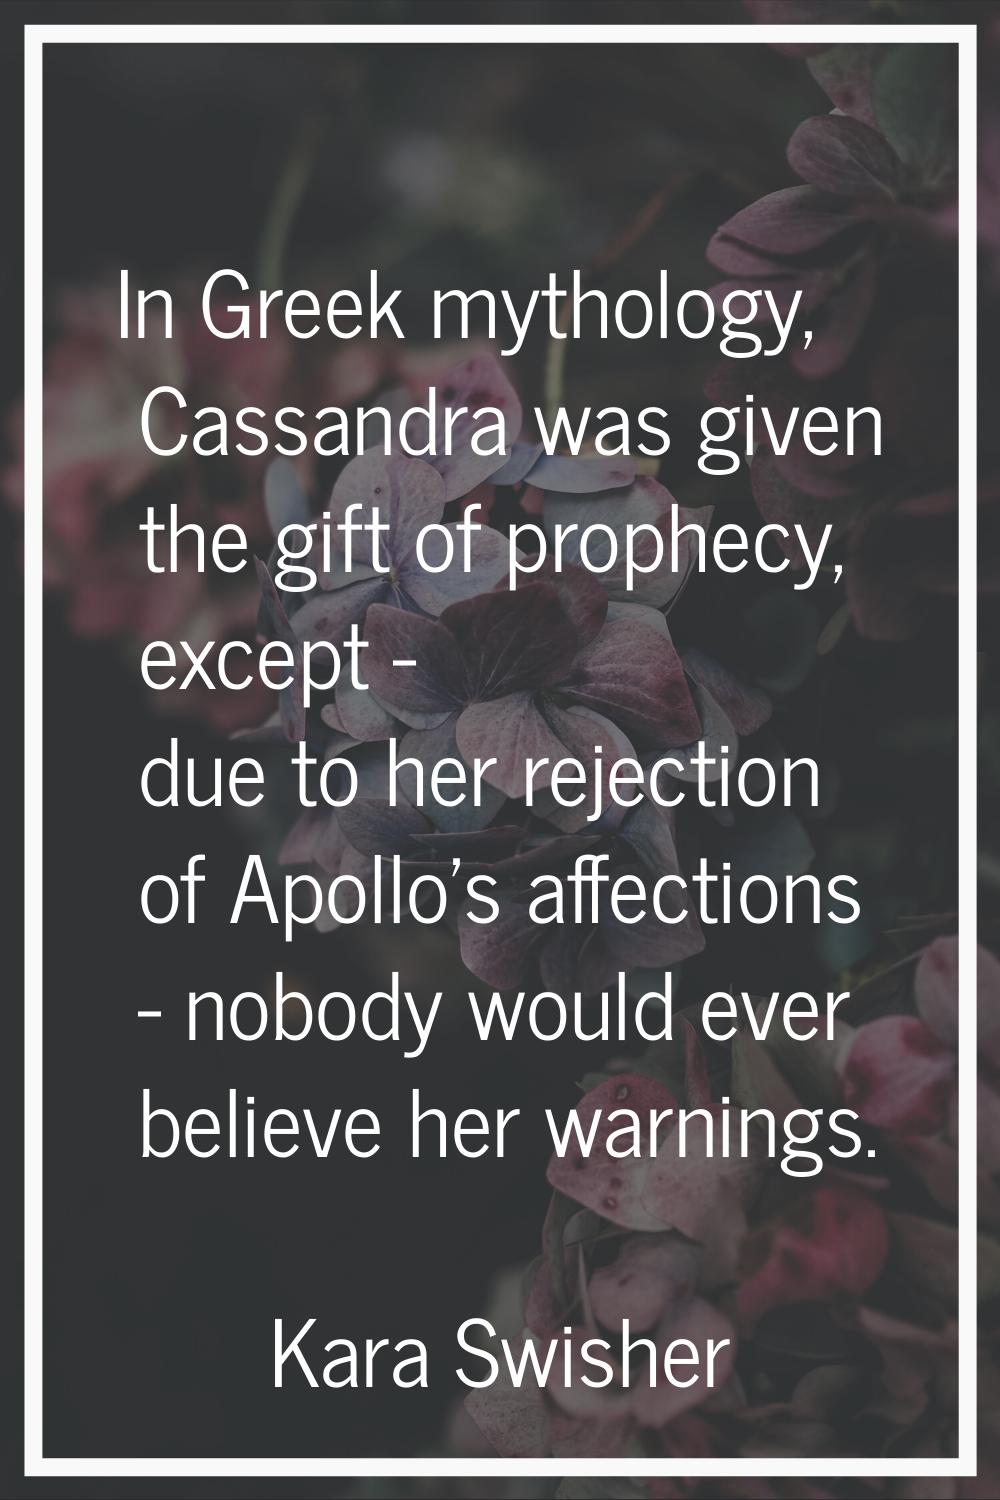 In Greek mythology, Cassandra was given the gift of prophecy, except - due to her rejection of Apol